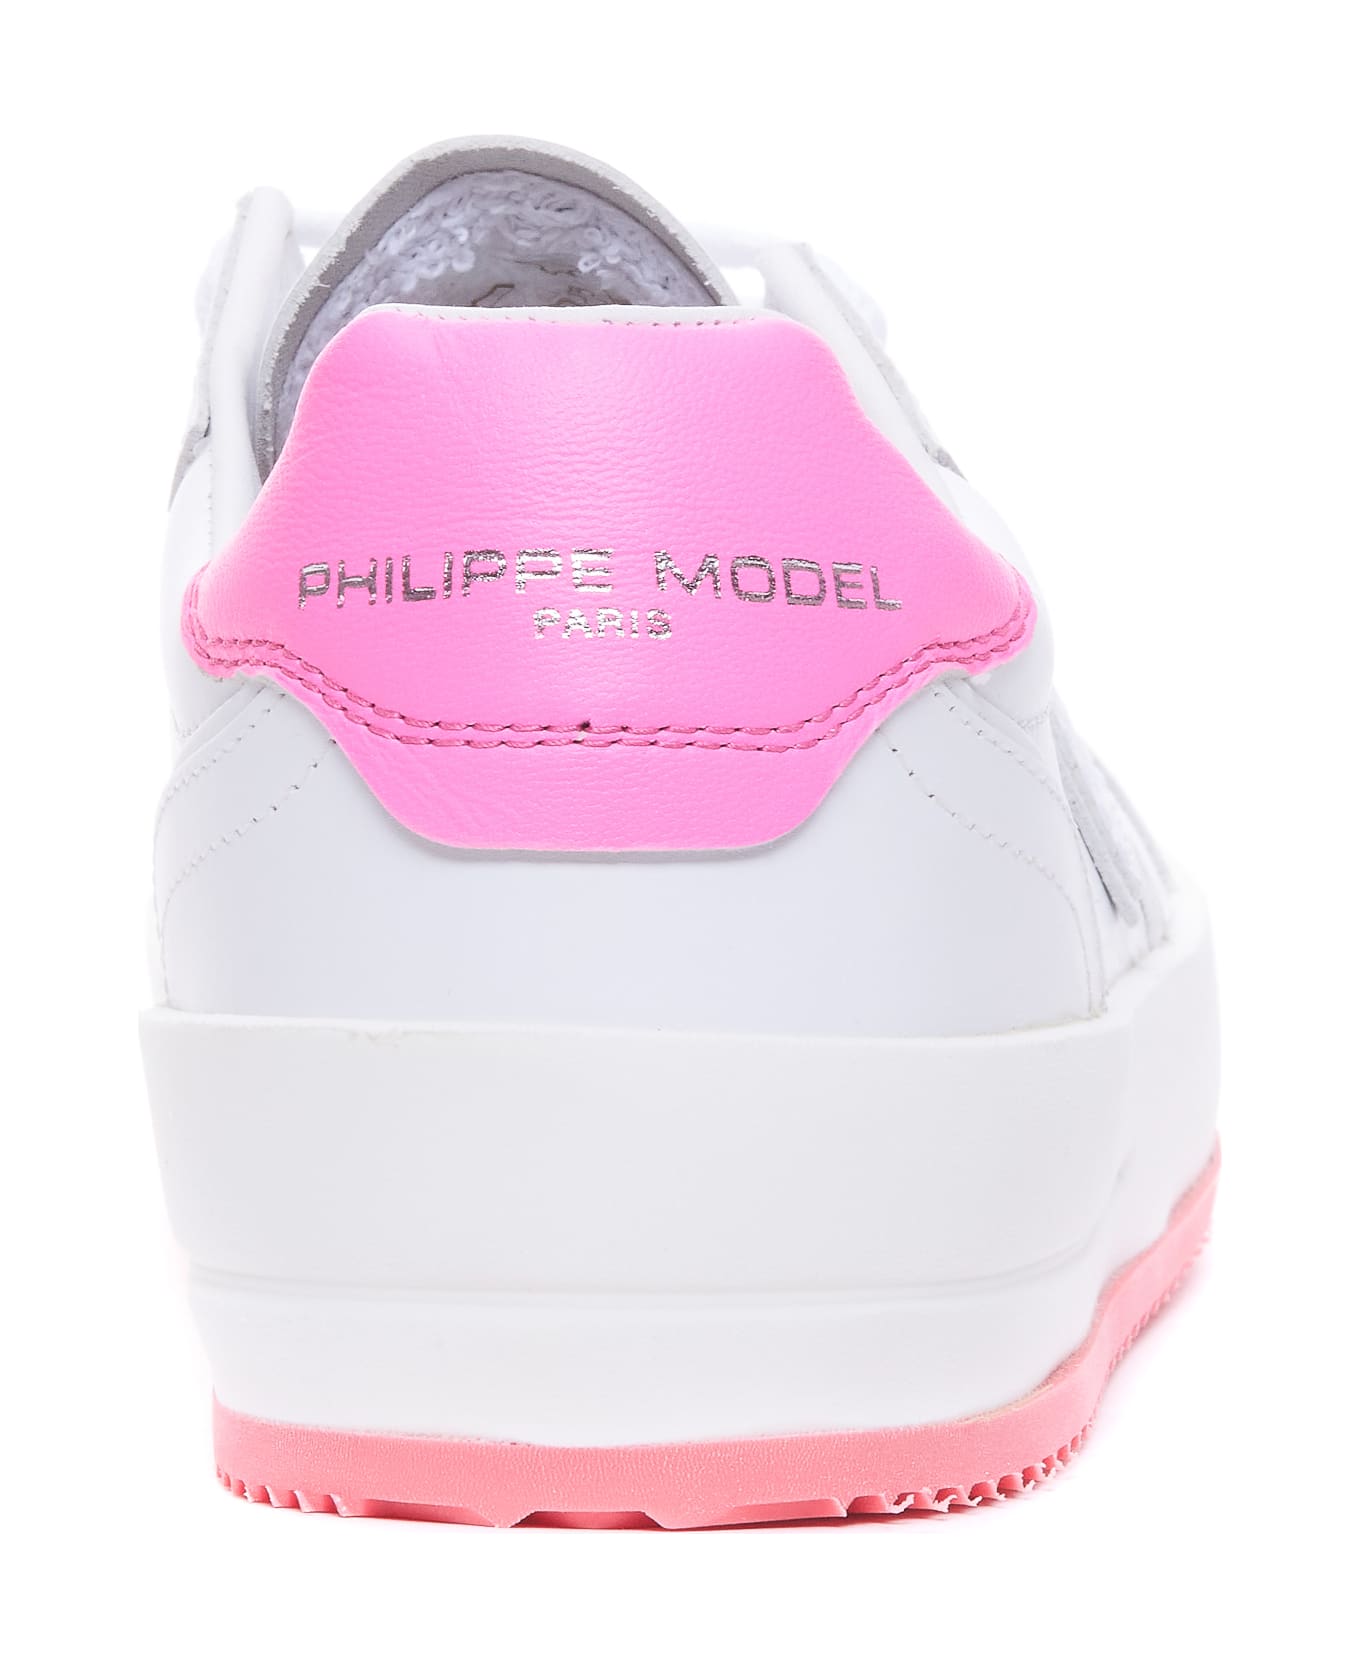 Philippe Model Nice Low Sneakers - WHITE